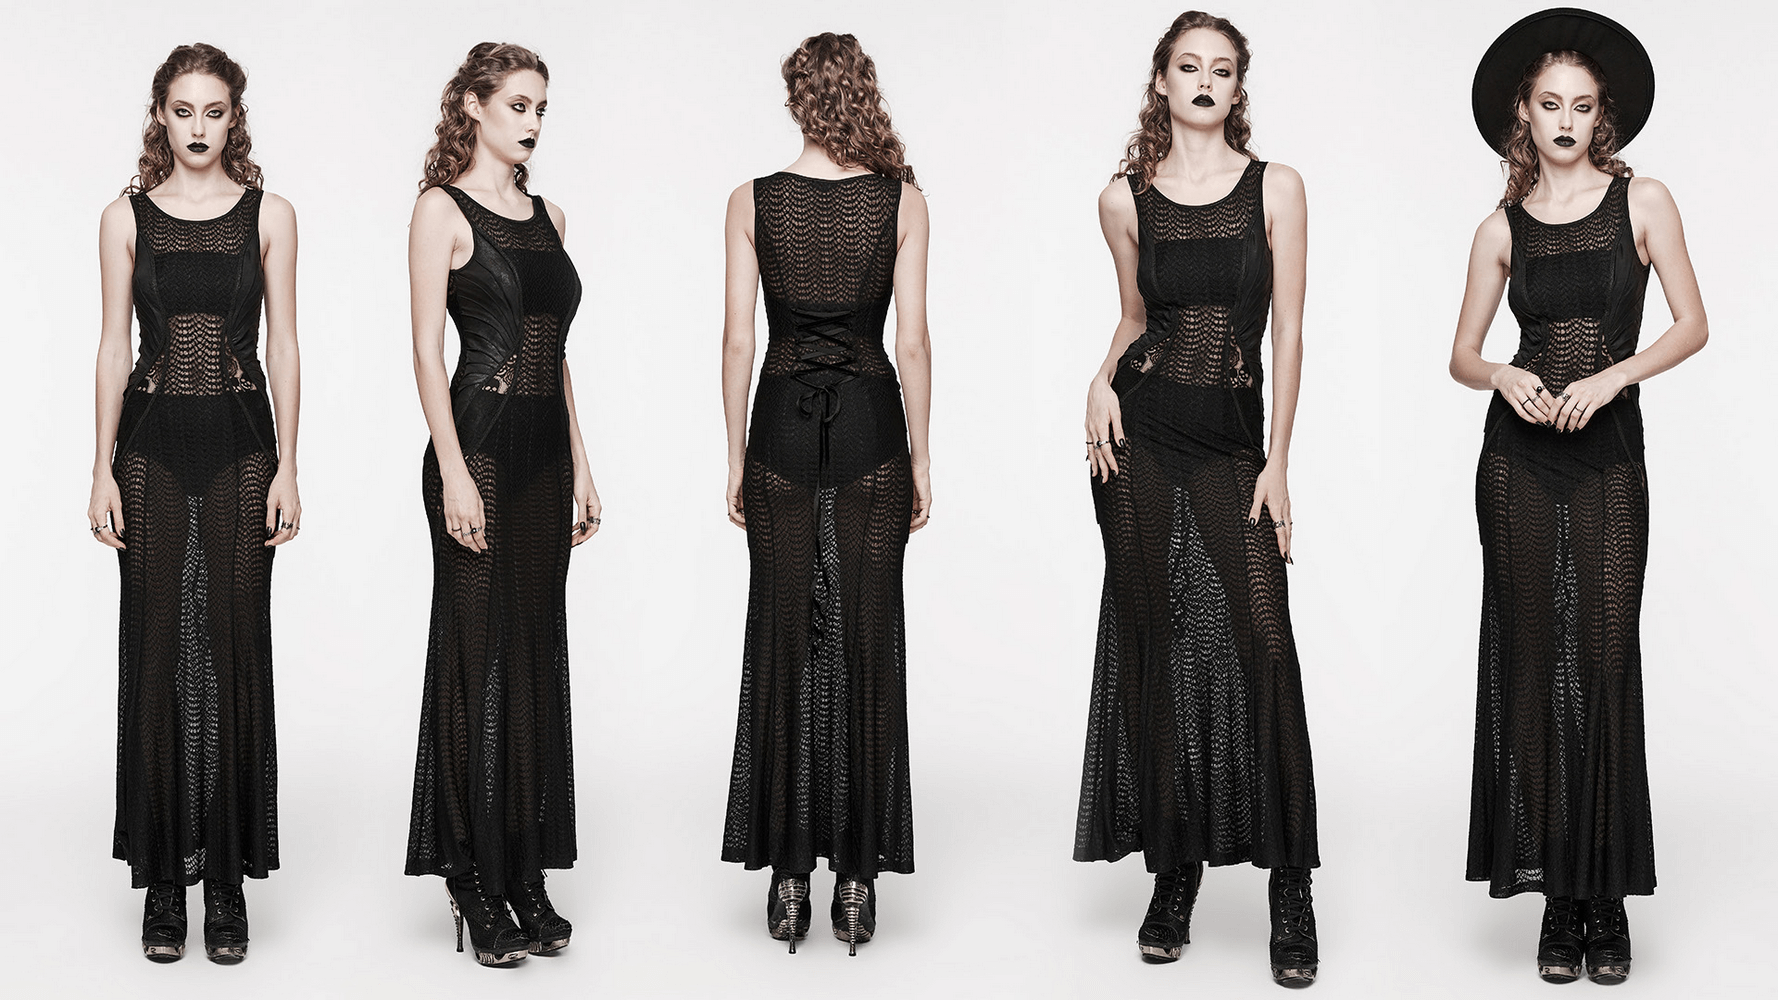 Gothic Fin See-Through Maxi Dress with Corset Back